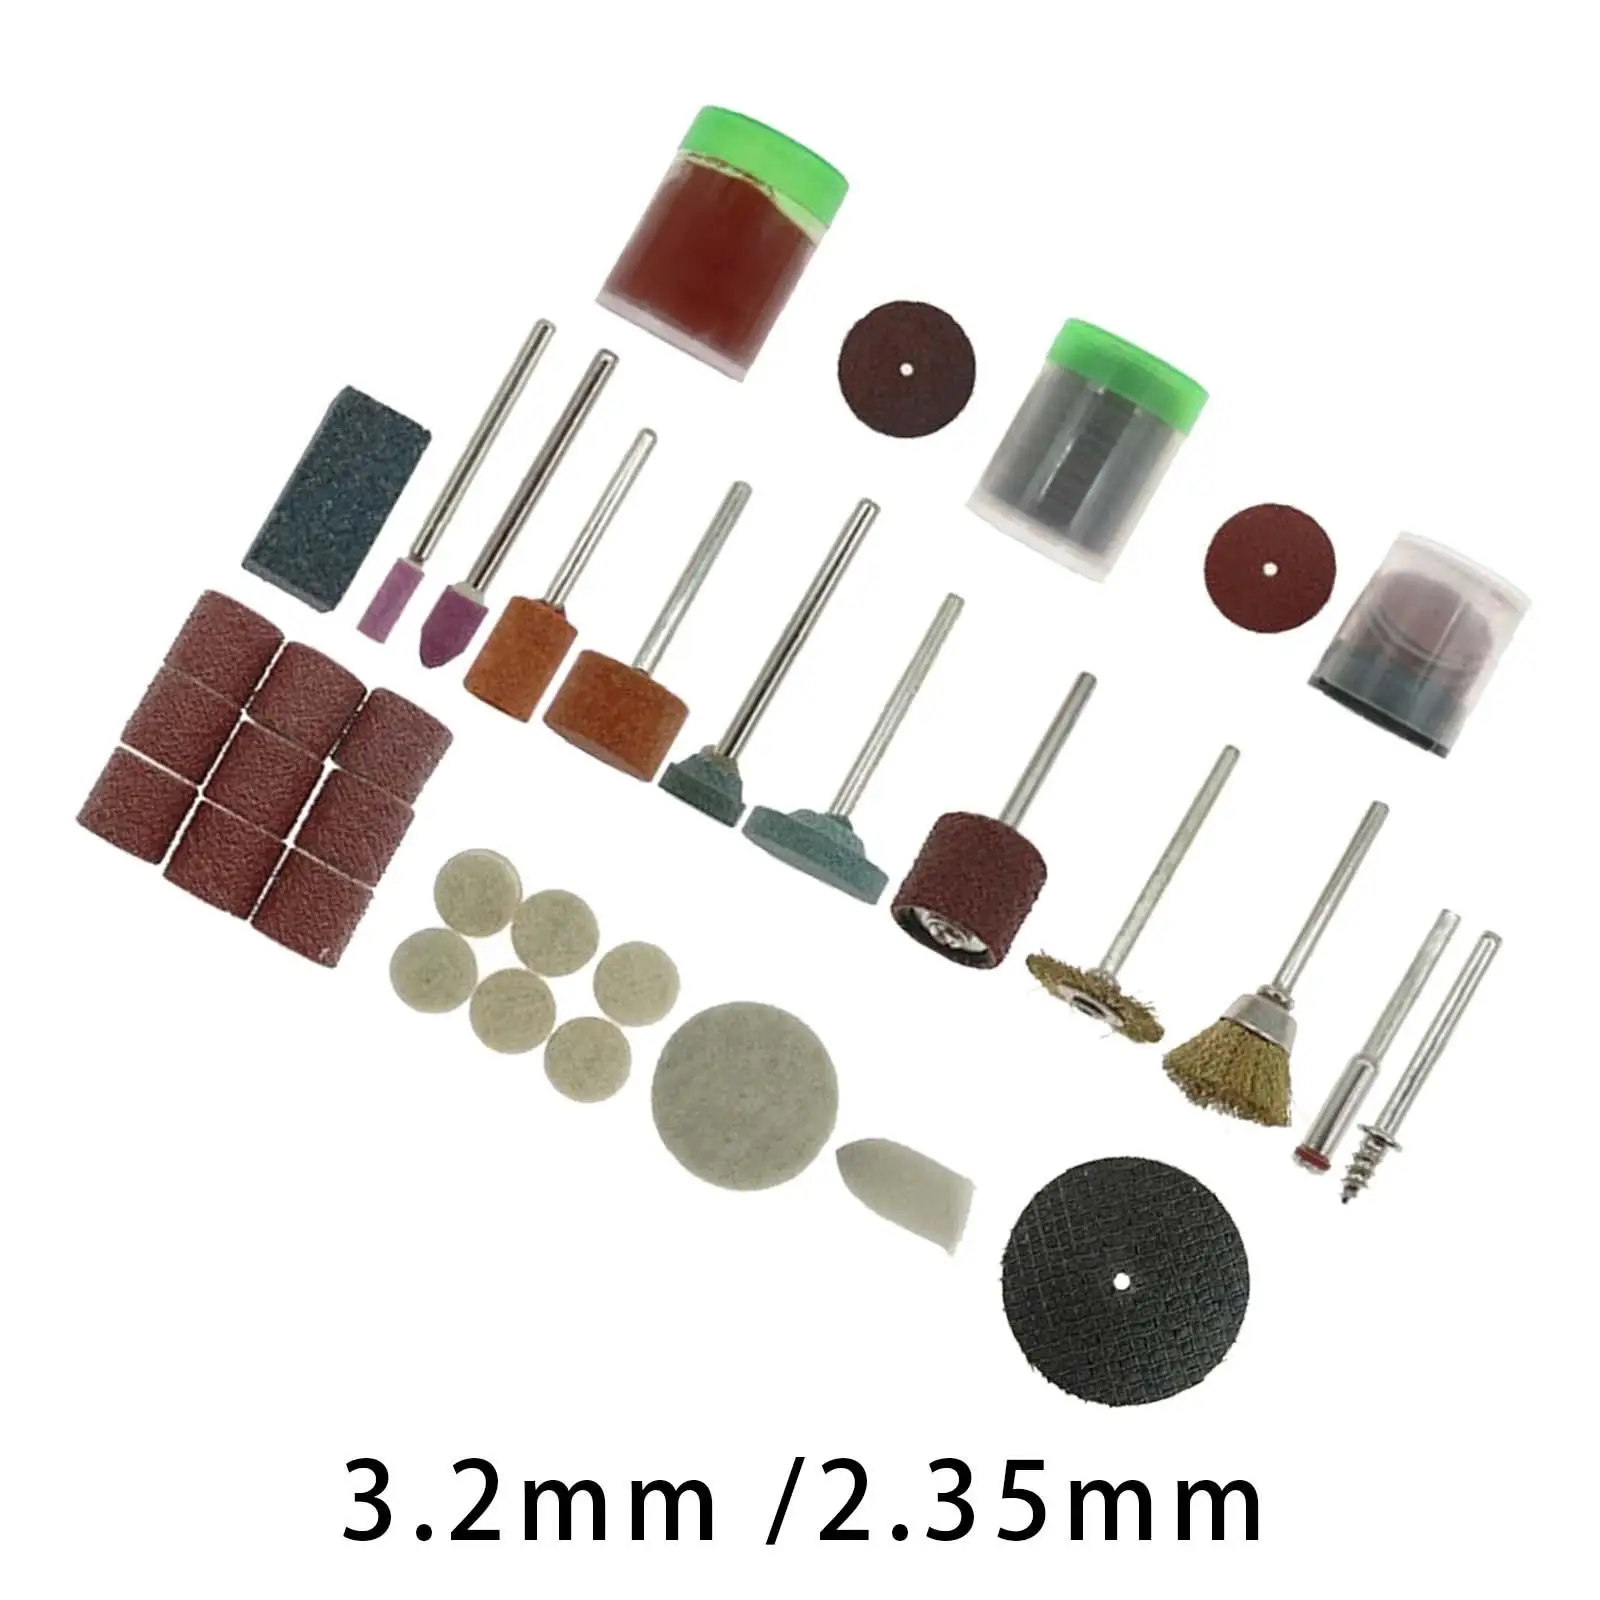 105Pcs Grinder Set Professional Accessories Rotary Tool Kits for Carving DIY Work Cutting DIY Crafts Projects Grinding